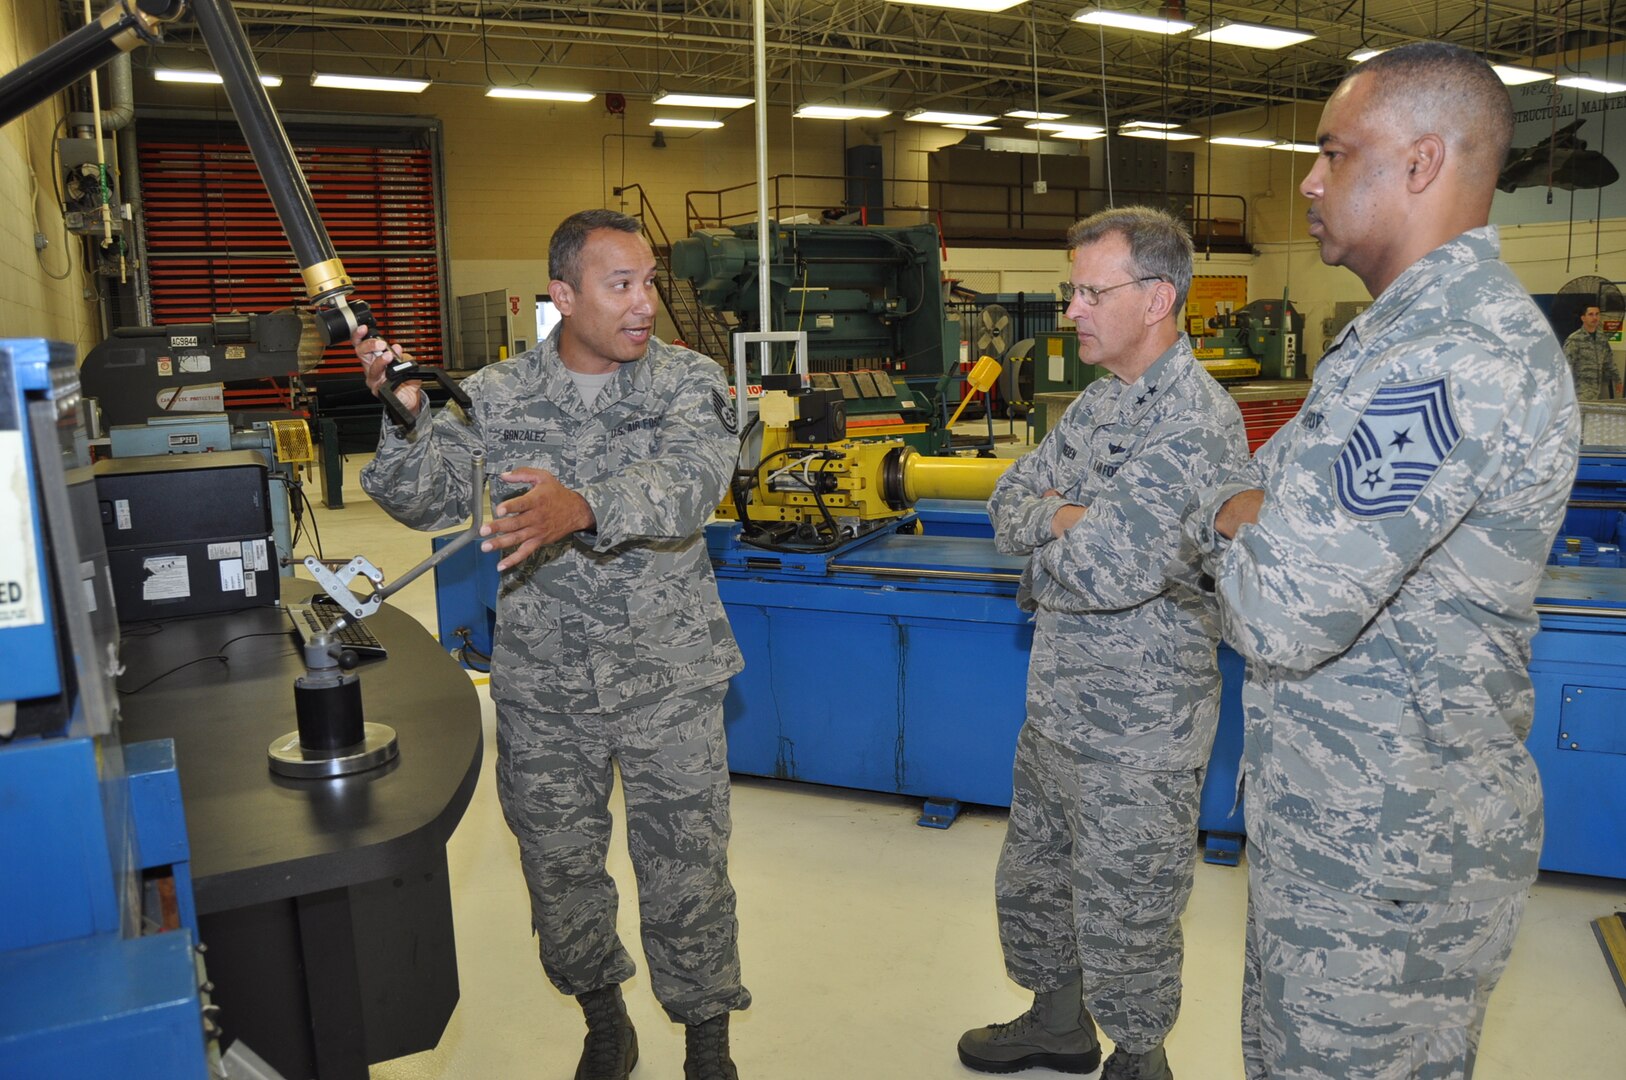 Tech. Sgt. John Gonzalez, 433rd Maintenance Squadron structural maintenance technician, demonstrates to 4th Air Force leadership how the technology available to his shop helps improve practices and increases production.  Maj. Gen. Randall Ogden, 4th Air Force commander, and Chief Master Sgt. Timothy White, Jr., 4th AF command chief, were visiting squadrons within the 433rd Maintenance Group Oct. 15, 2017 during their four-day visit to the Alamo Wing. (U.S. Air Force photo/Senior Airman Bryan Swink)